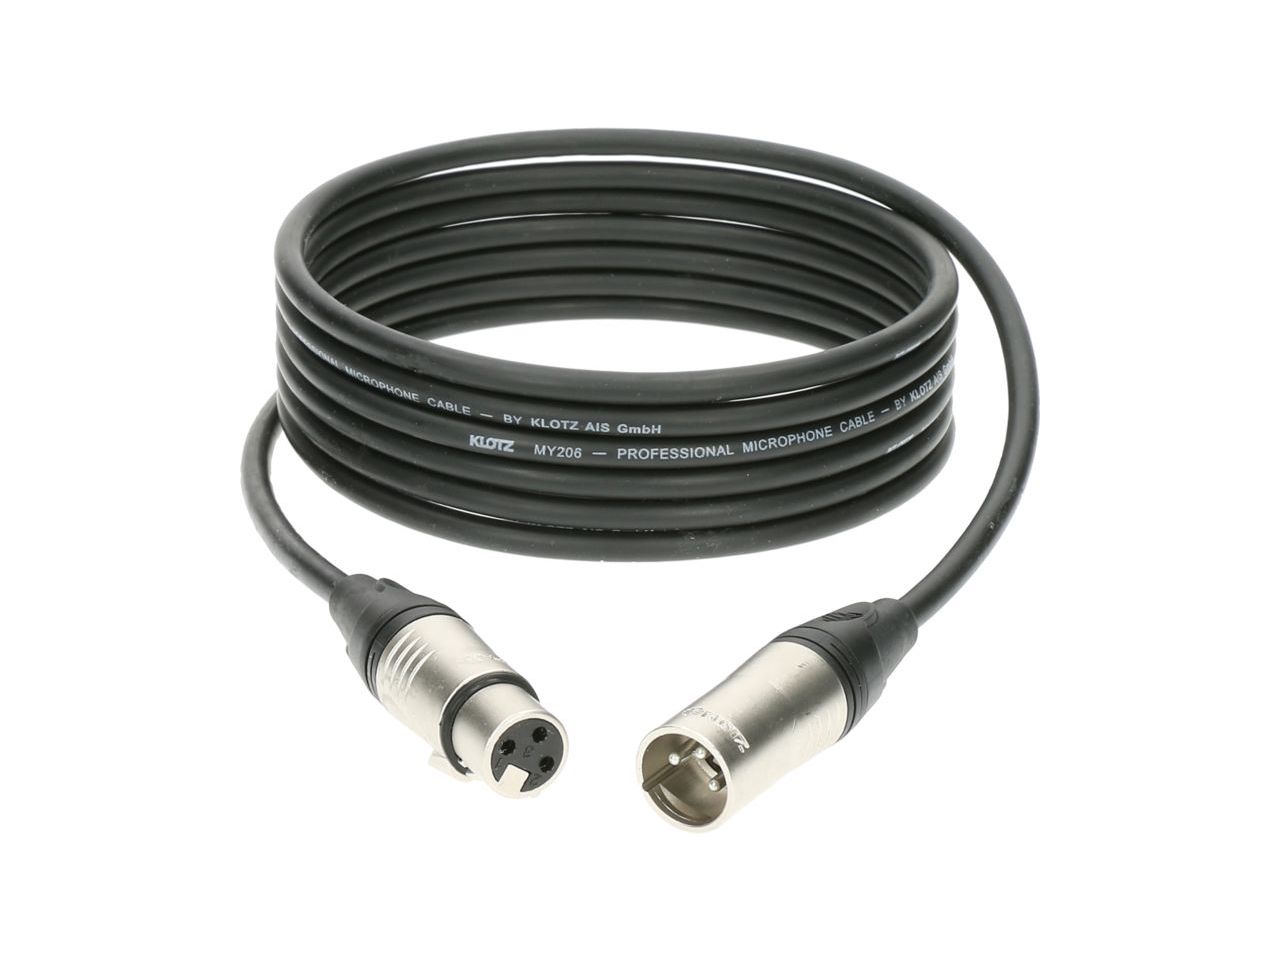 Klotz Professional Microphone XLR Cable - M1 - High Quality - German-Made